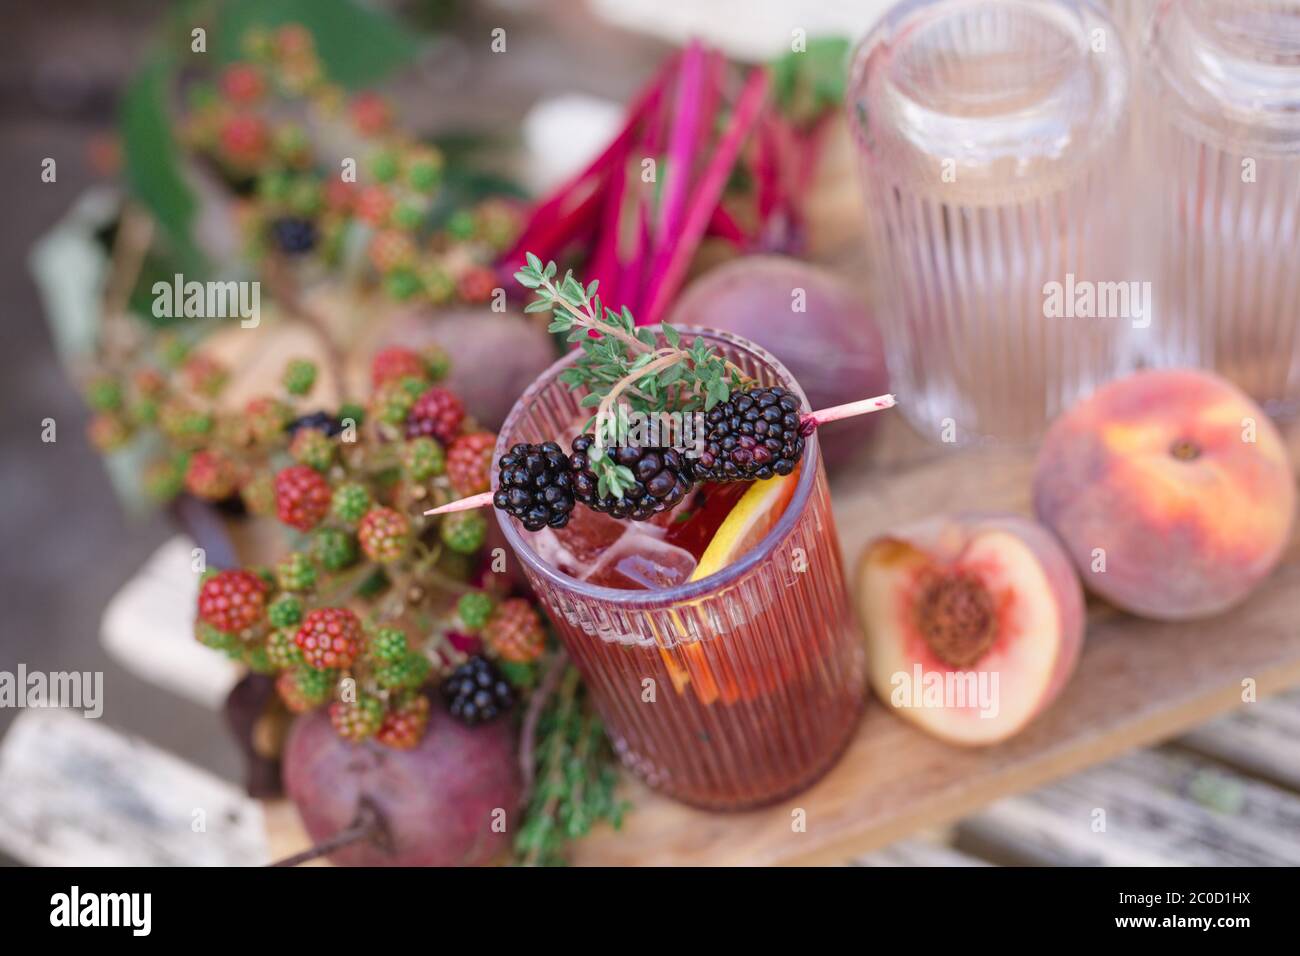 Wild berry cocktail in highball glass for picnic or party or rustic drink recipe Birdseye view Stock Photo